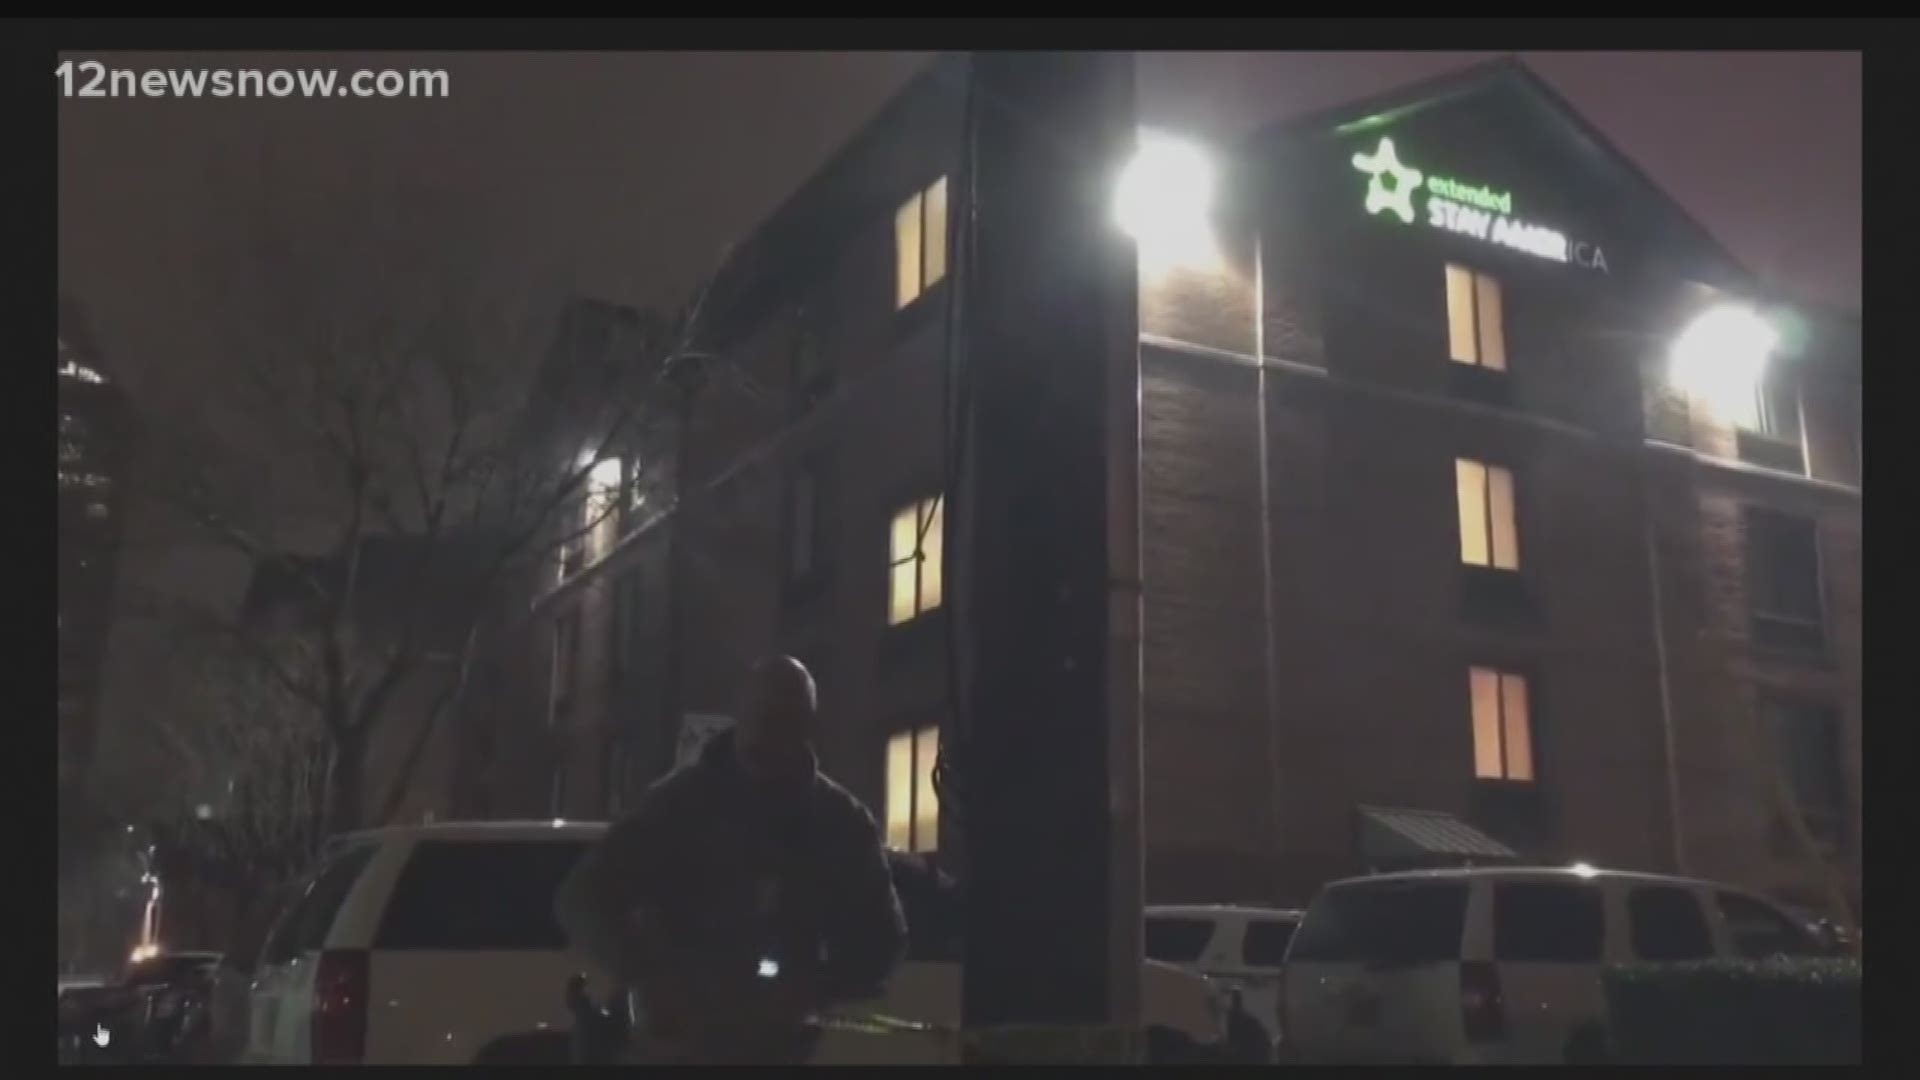 Husband barricades himself in Houston hotel after shooting his wife and daughter.